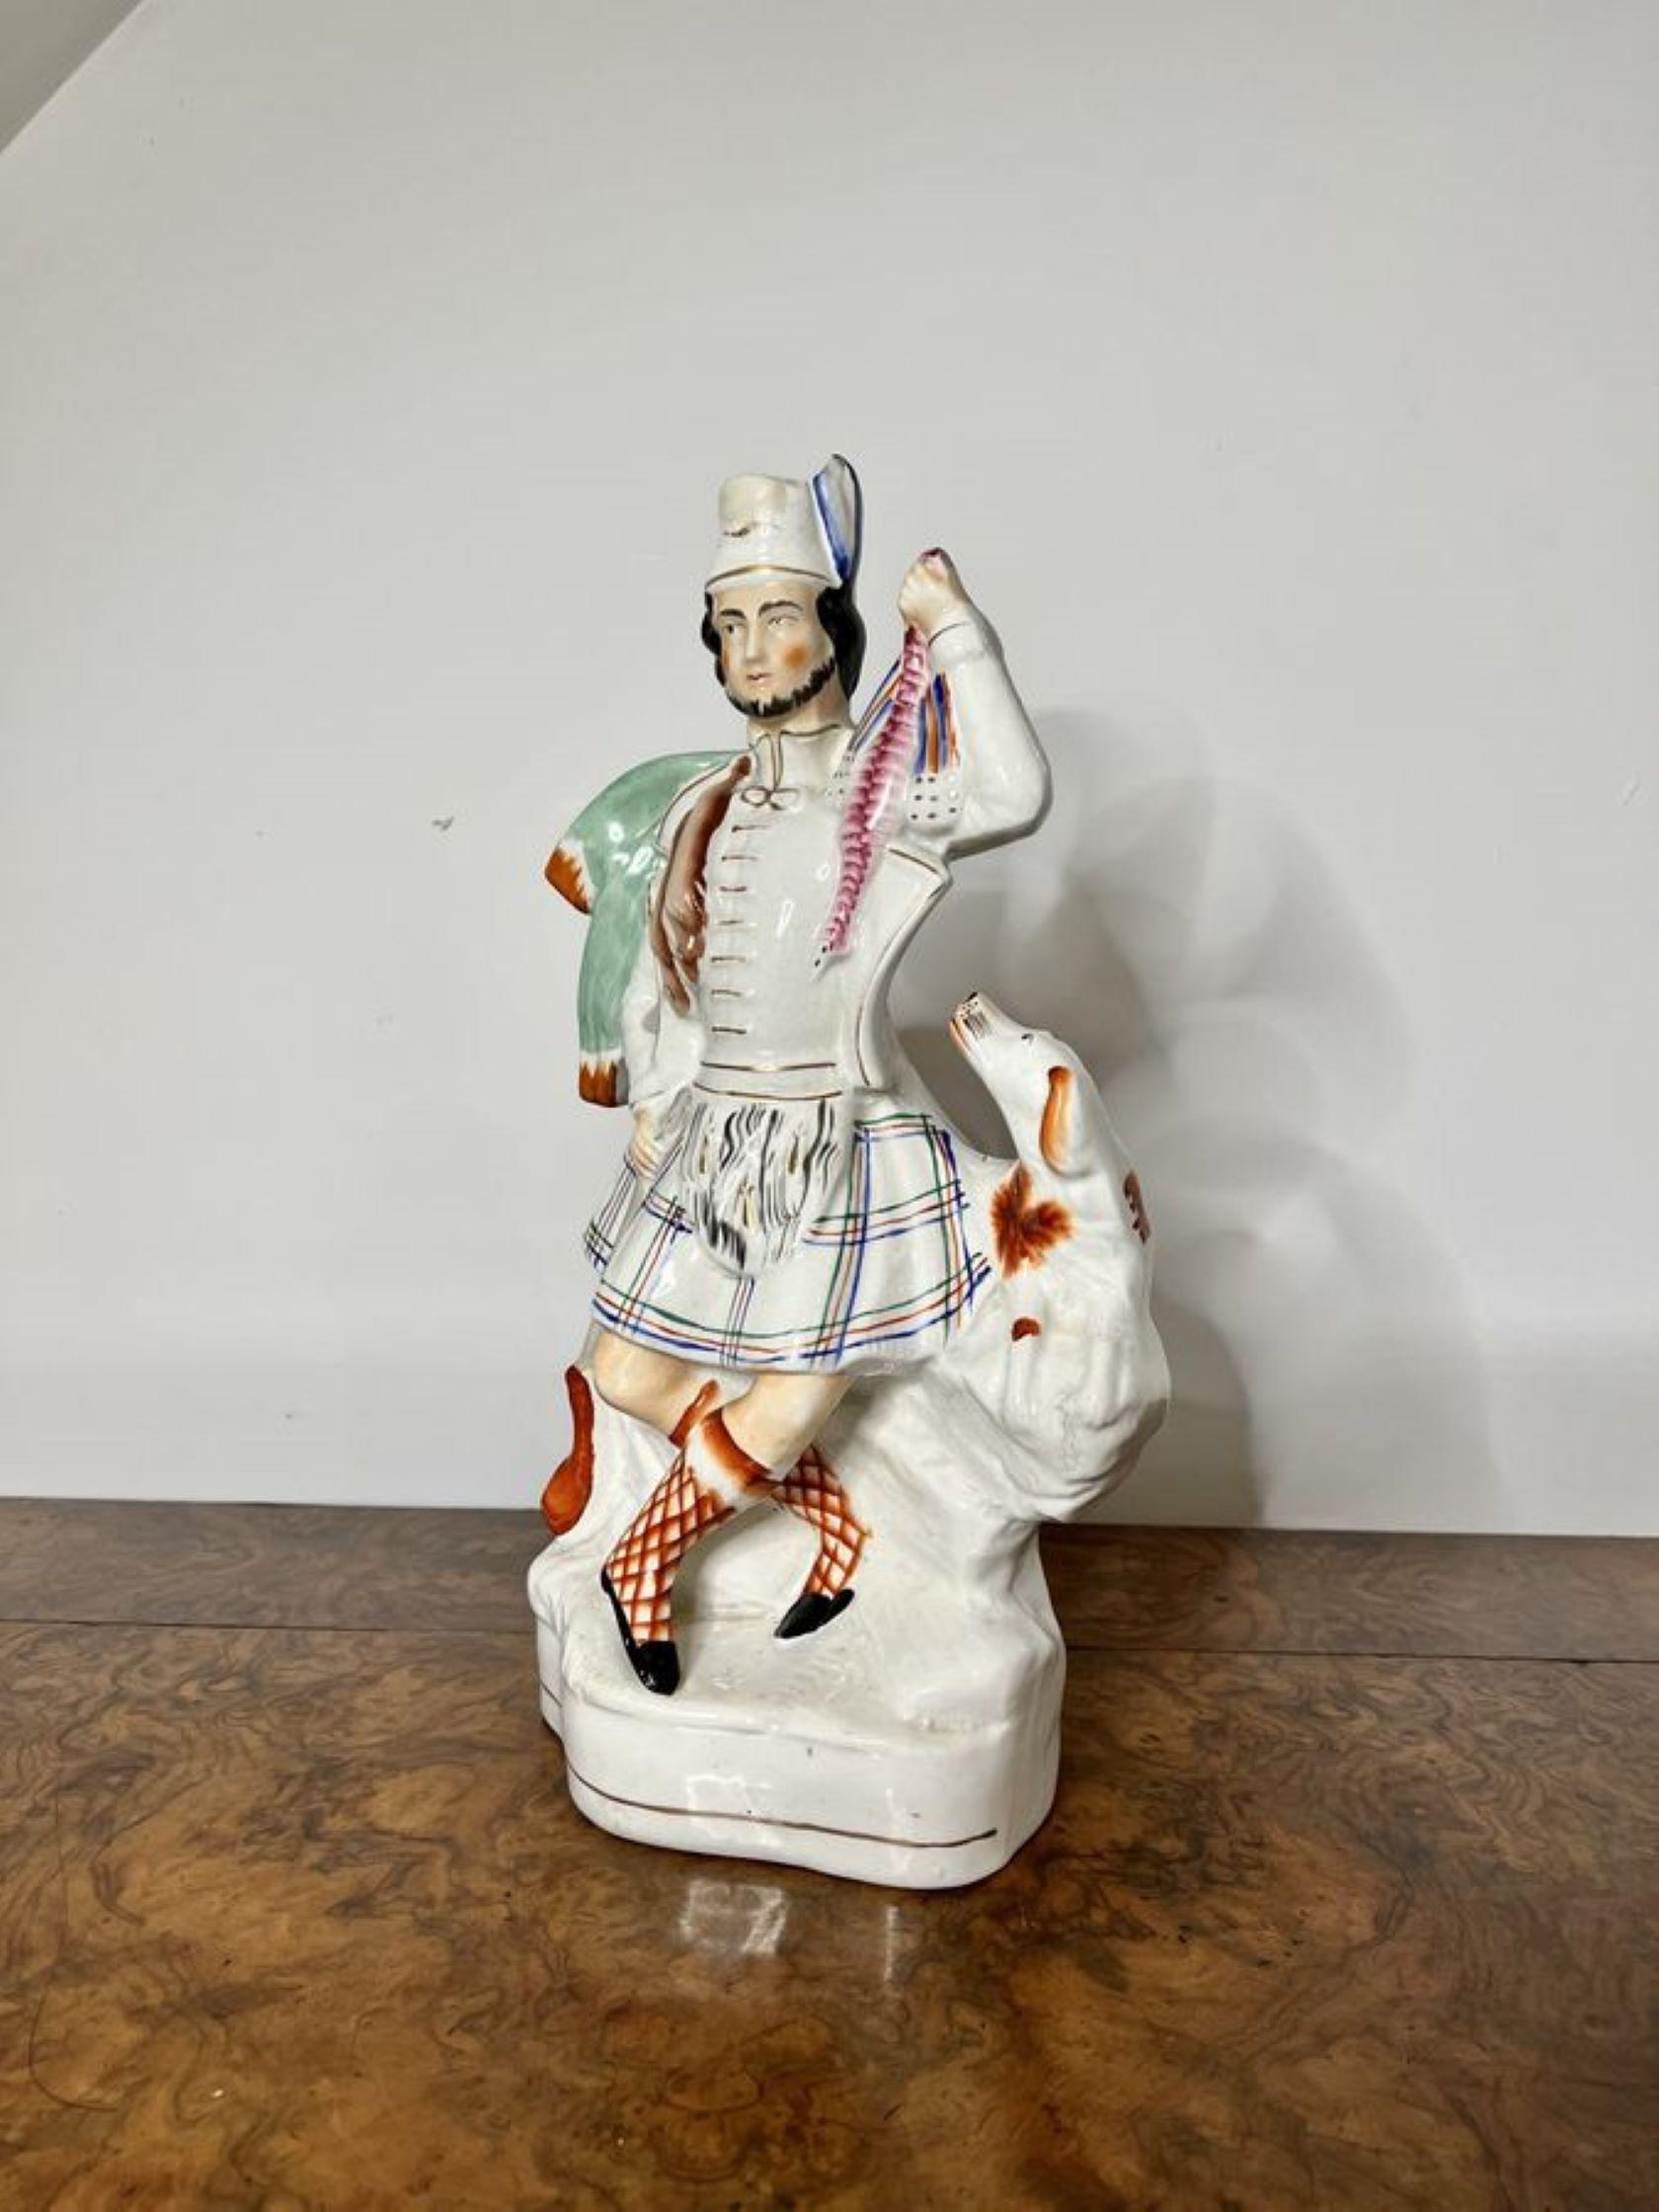 Unusual large antique Victorian Staffordshire figure of a Highlander in traditional clothing with his dog to his side holding a bird in one hand, rabbits to the other side and a hunting gun, hand painted in fantastic white, blue, green, red and gold